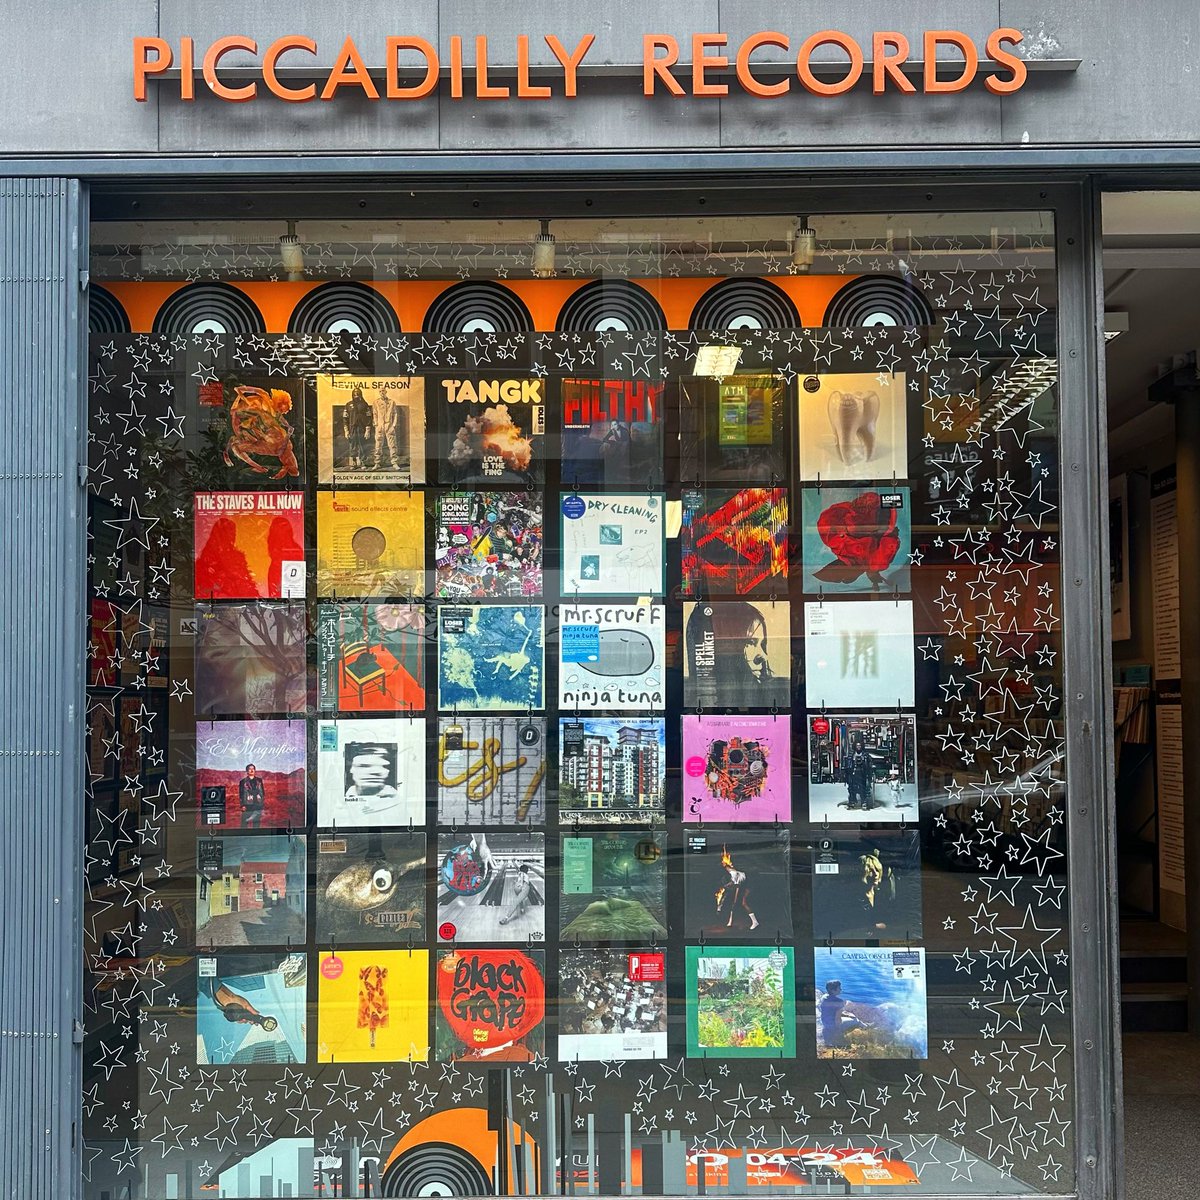 The constant revolving window display. #newmusicfriday piccadillyrecords.com